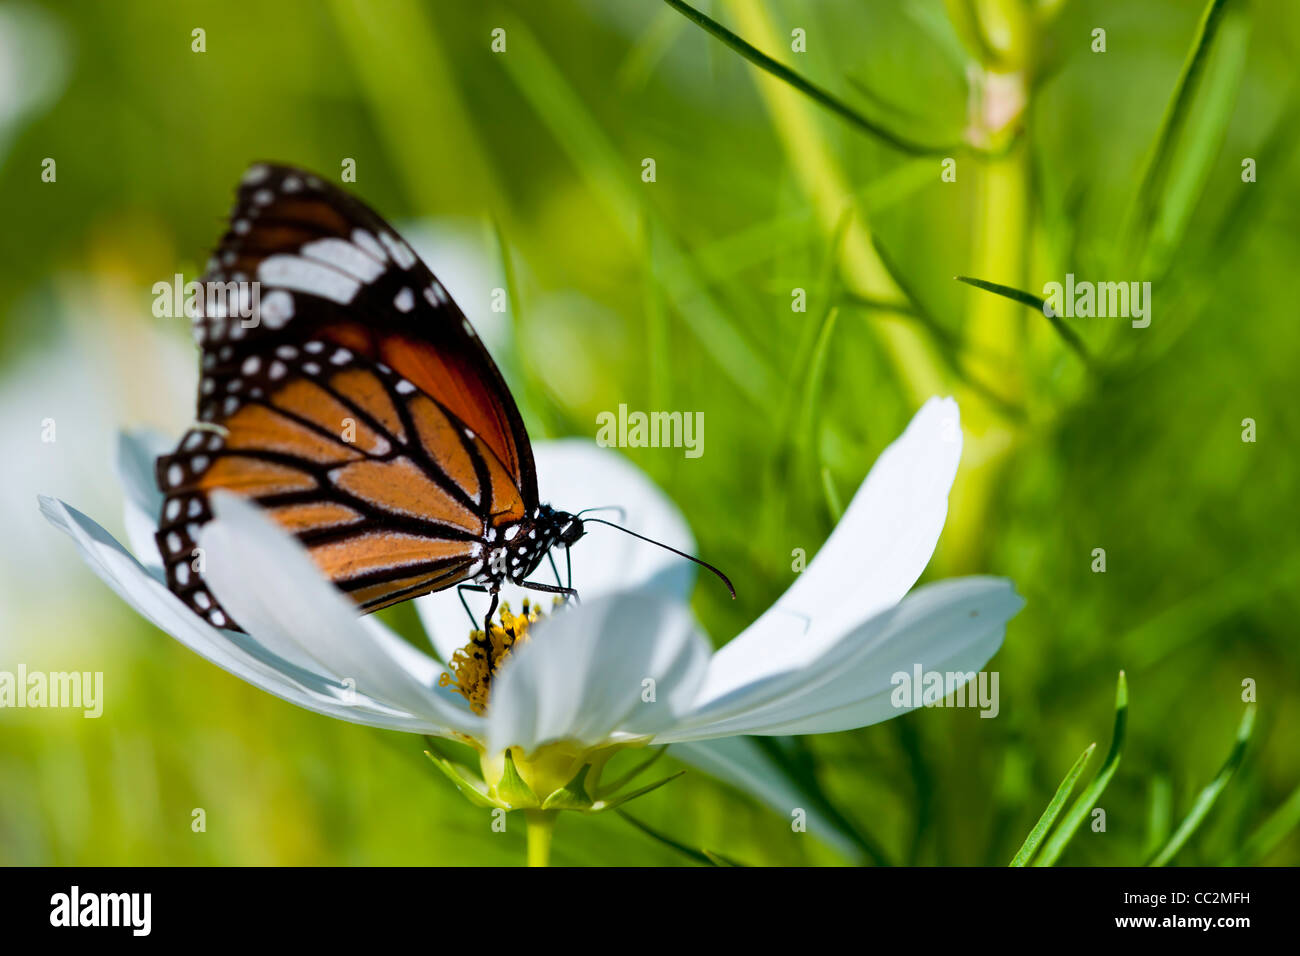 Monarch butterfly resting on a white flower Stock Photo